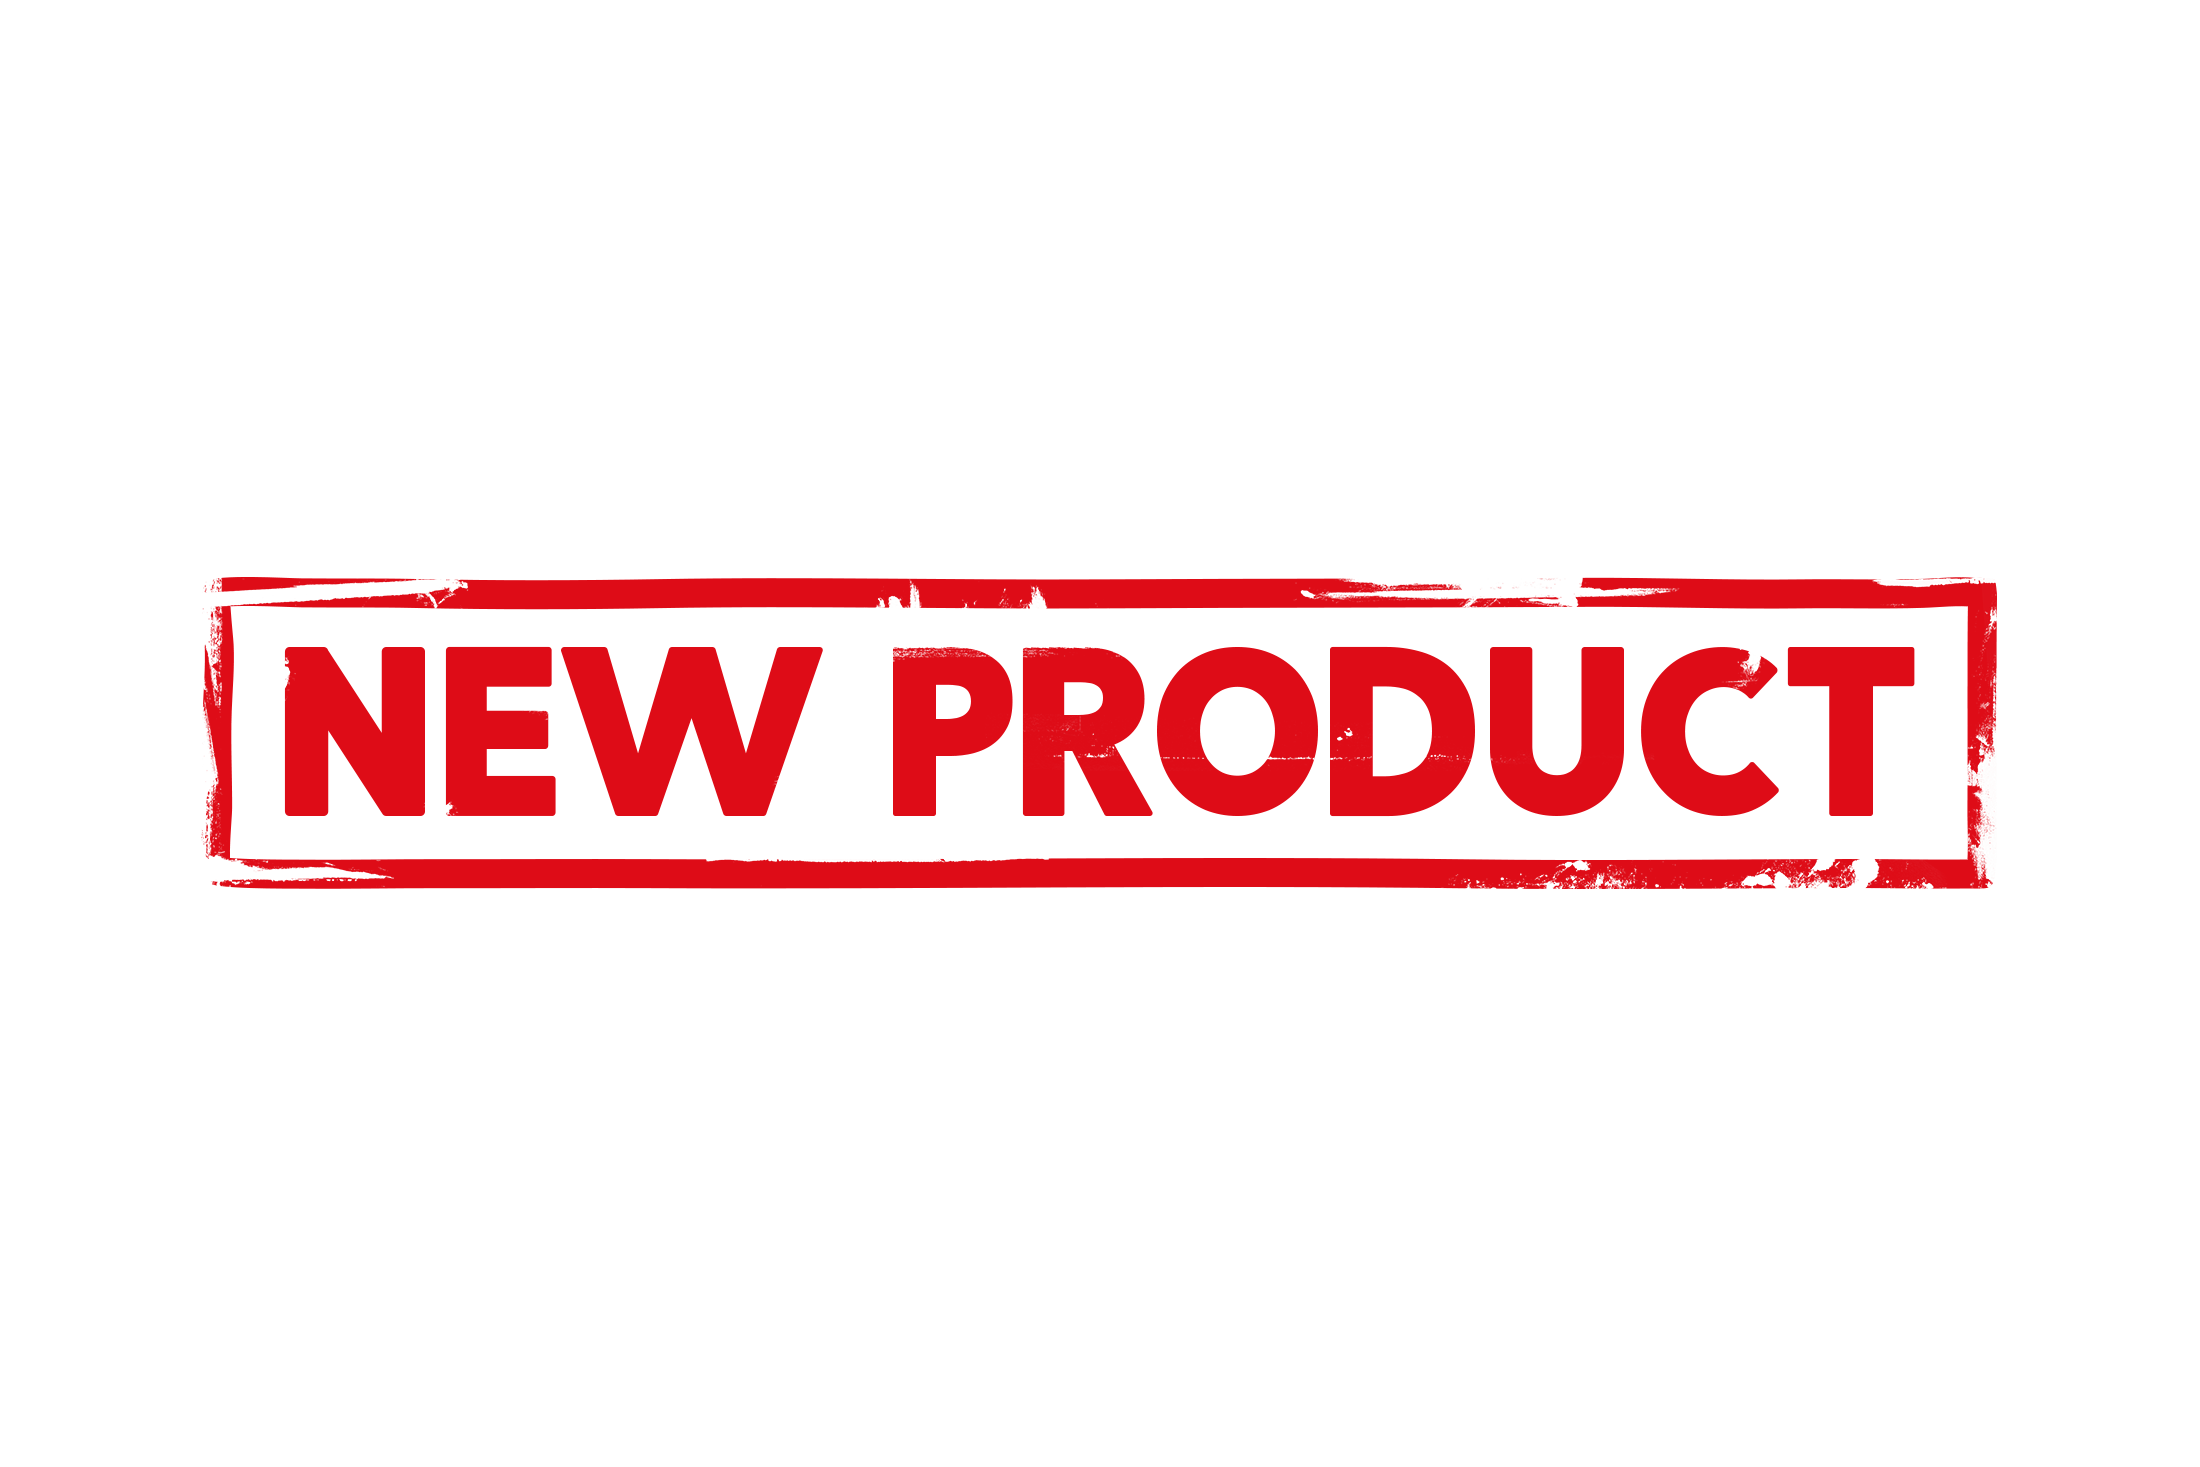 Product new